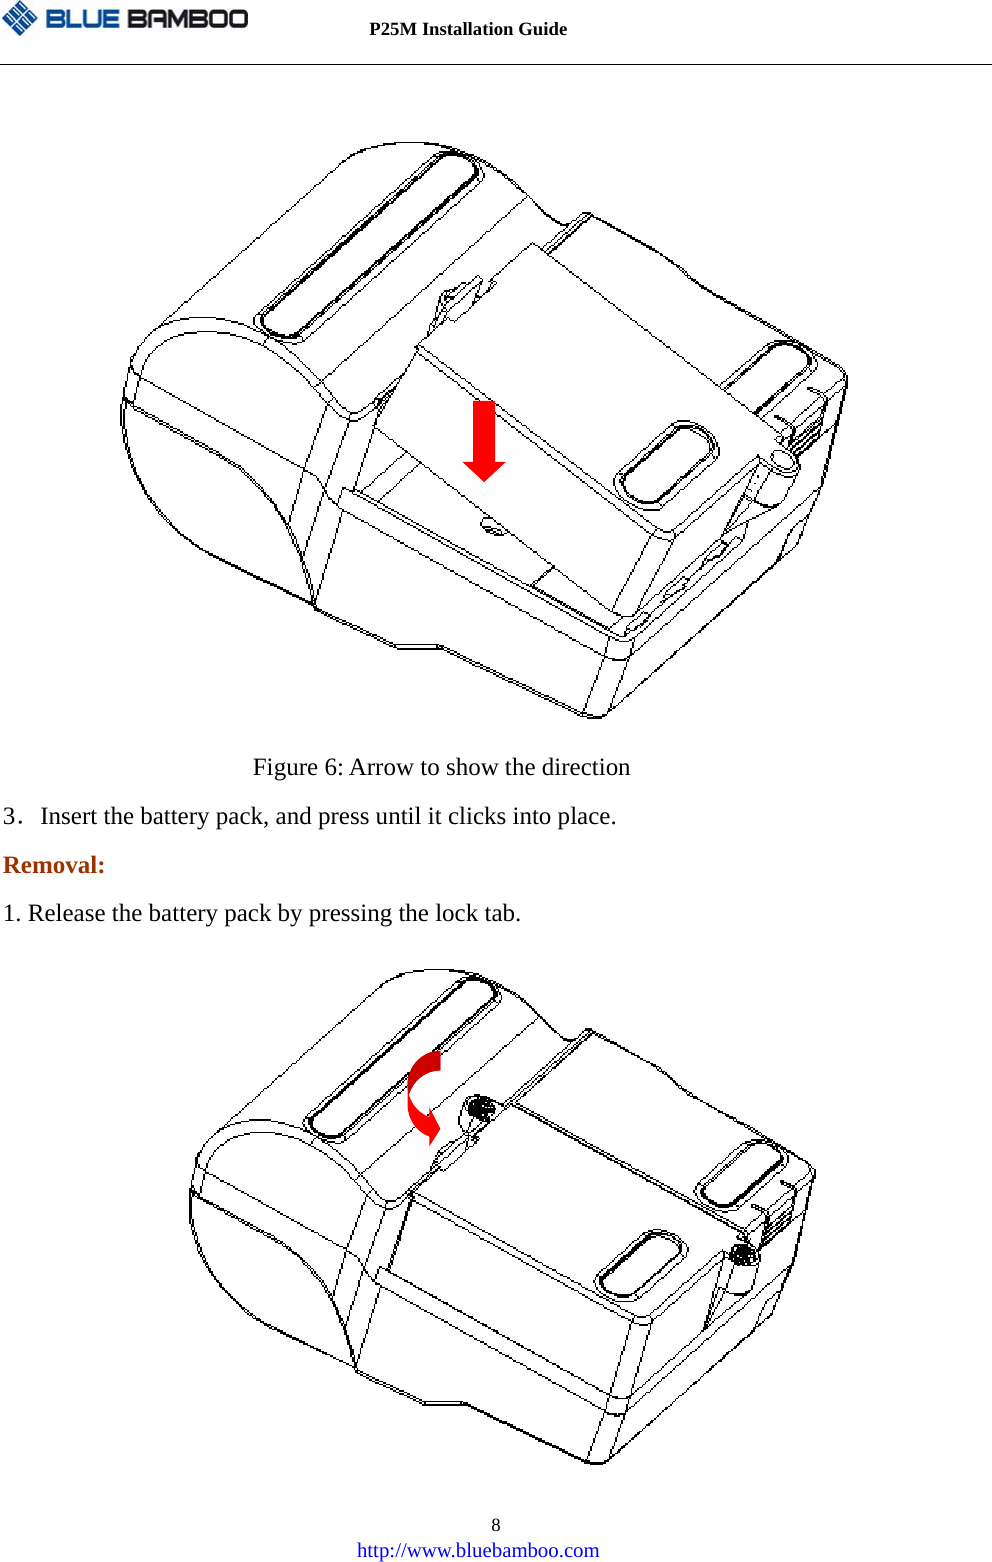          P25M Installation Guide   http://www.bluebamboo.com 8                              Figure 6: Arrow to show the direction 3．Insert the battery pack, and press until it clicks into place. Removal: 1. Release the battery pack by pressing the lock tab.               